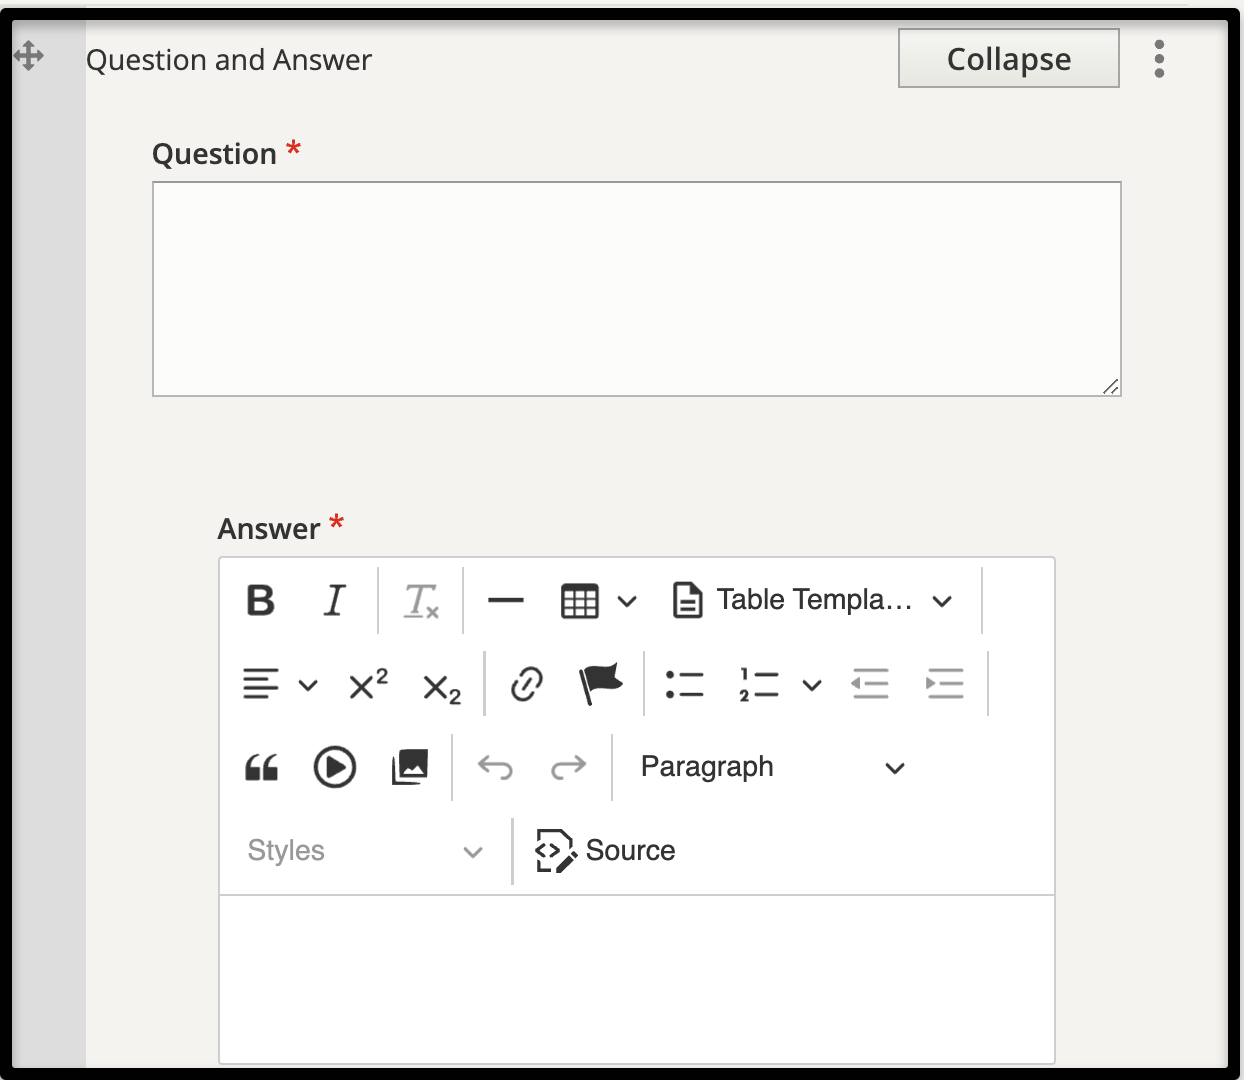 Question and Answer Text Box